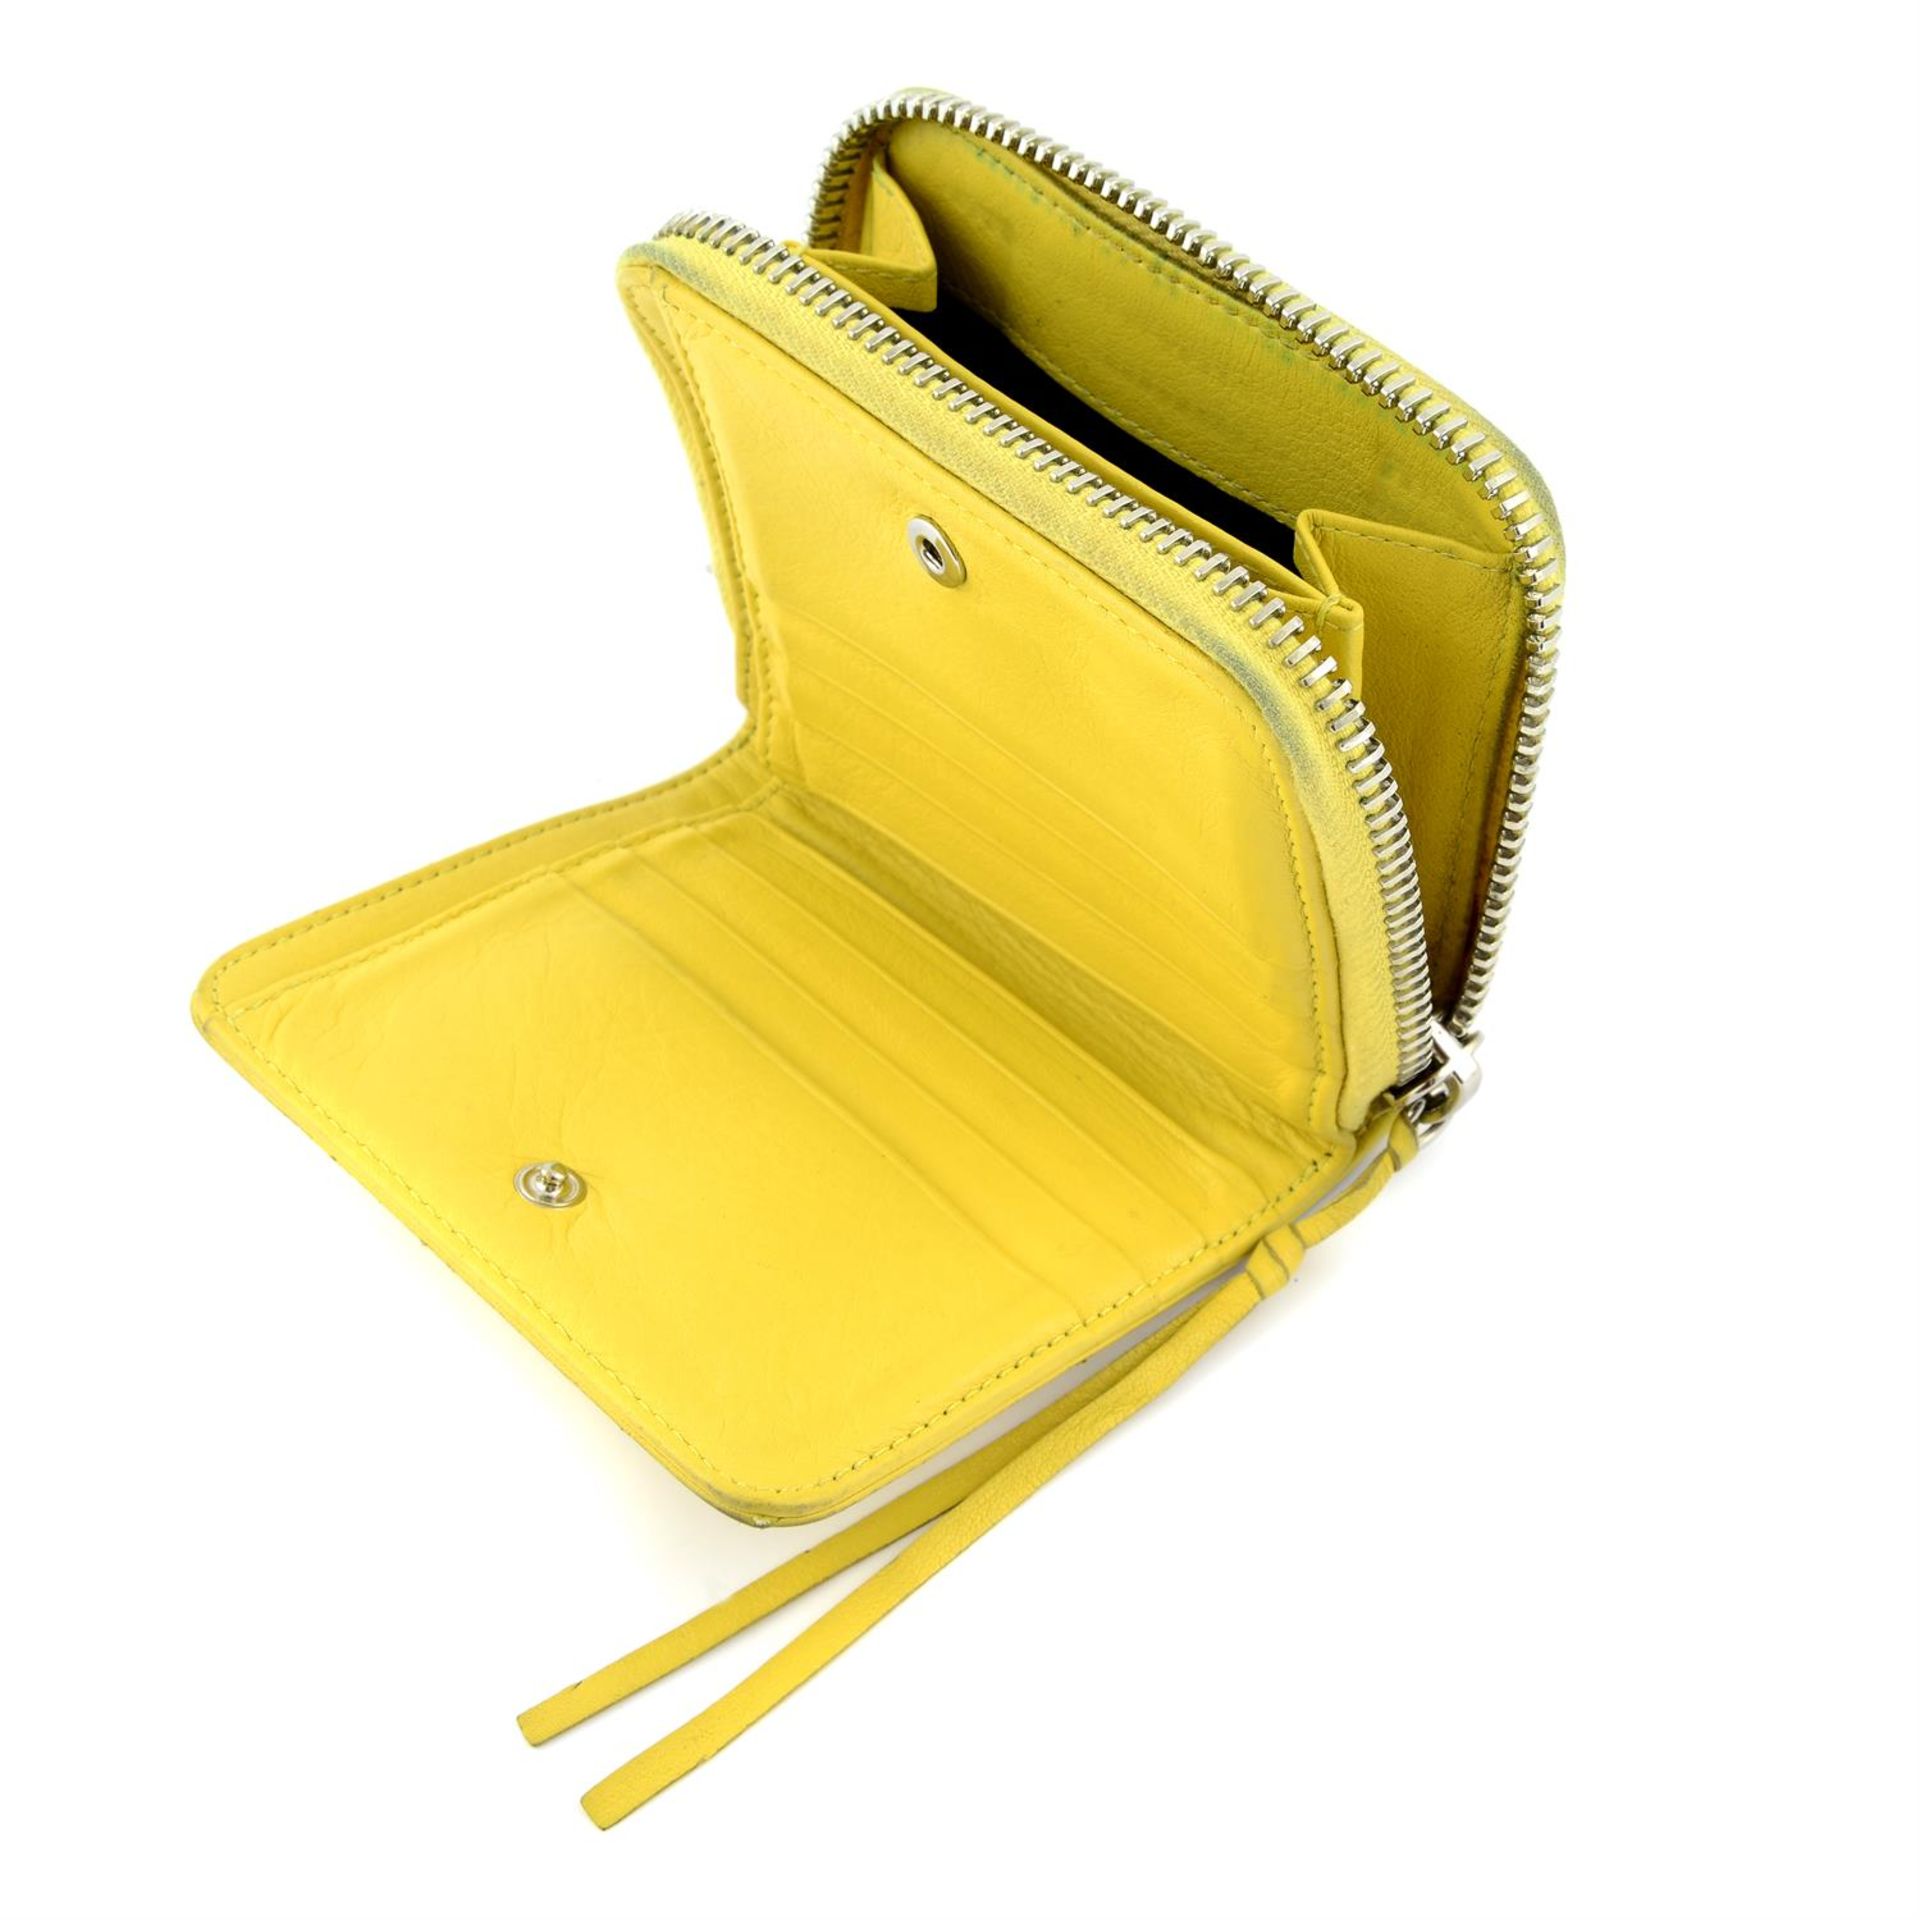 BALENCIAGA - a chartreuse leather compact wallet. - Image 5 of 5